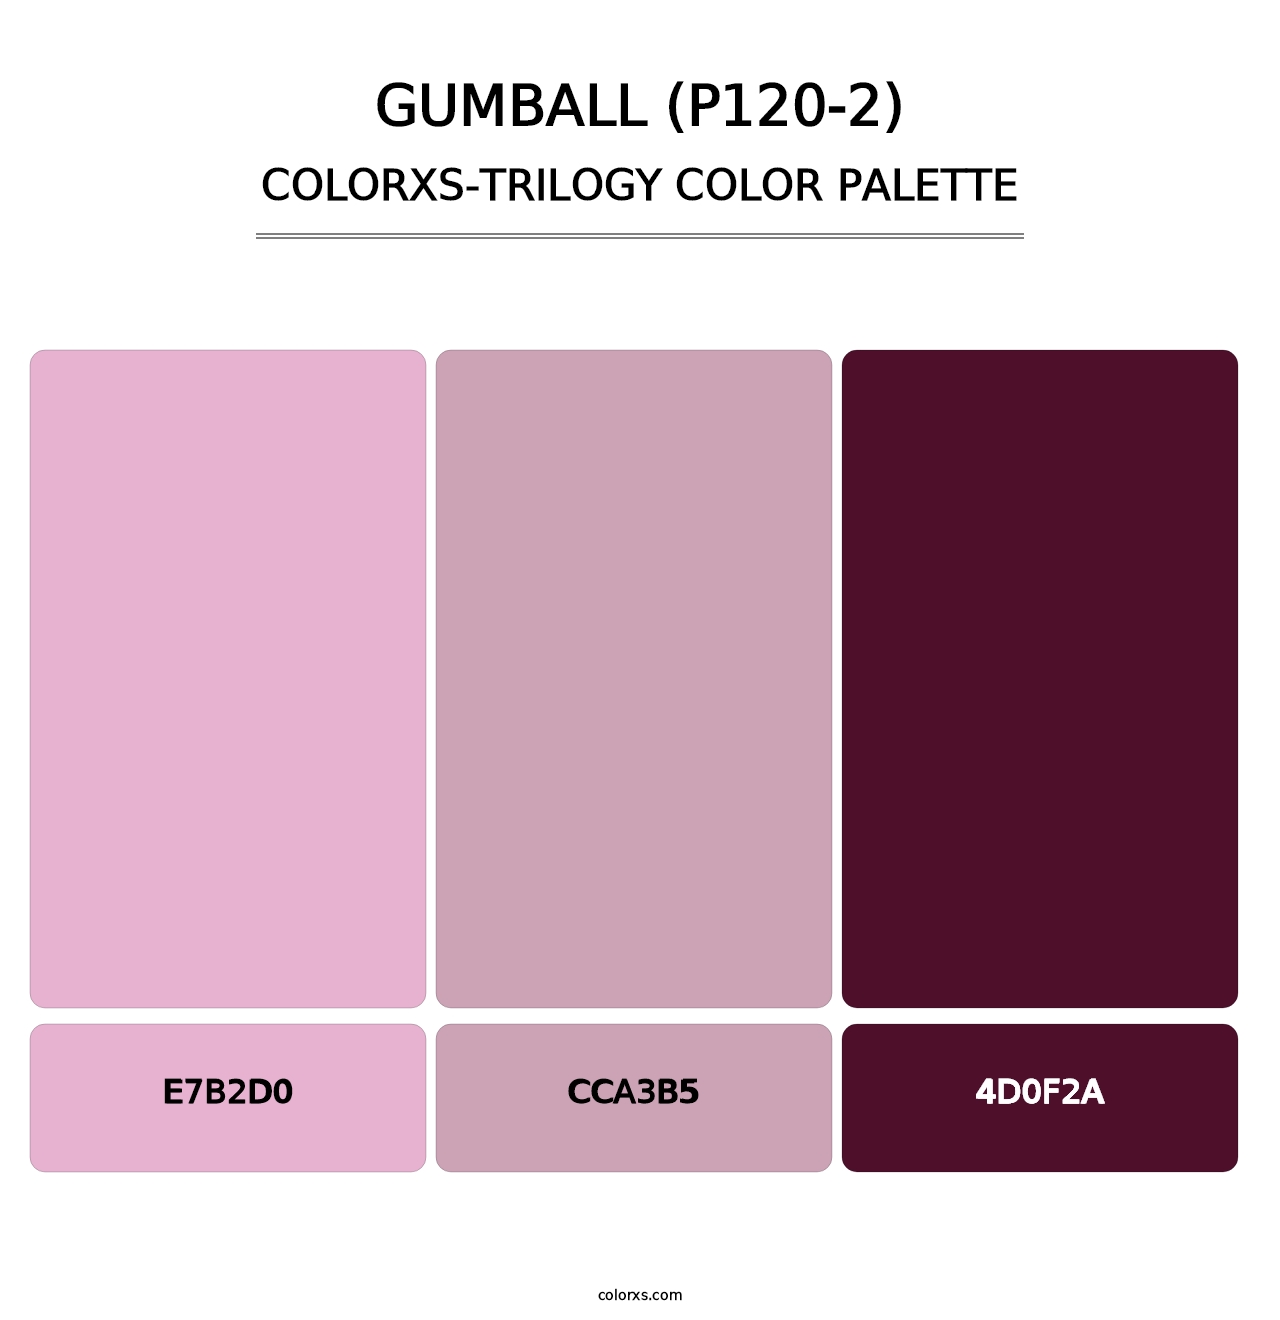 Gumball (P120-2) - Colorxs Trilogy Palette